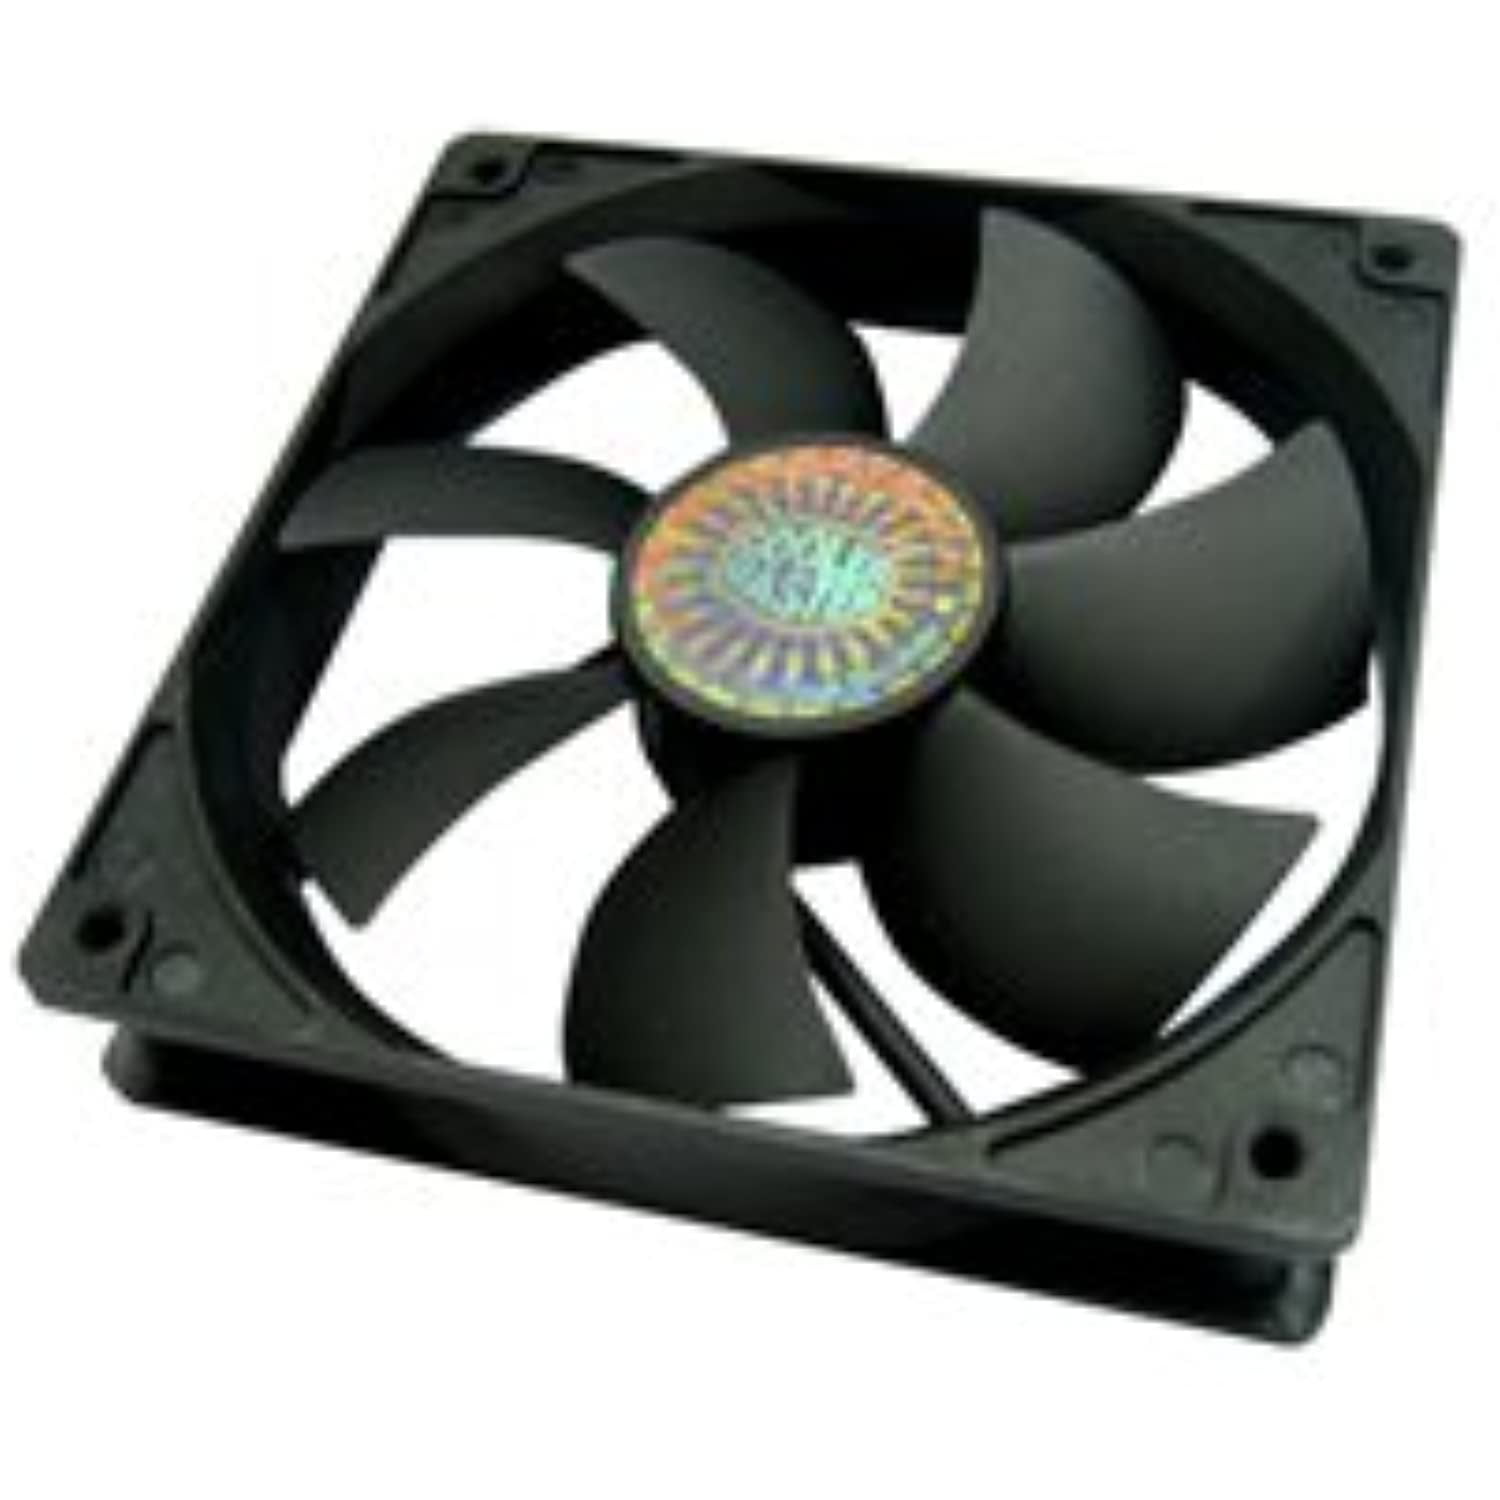 Cooler Master Ball Bearing 80mm Cooling Fan for Computer Cases and CPU Coolers